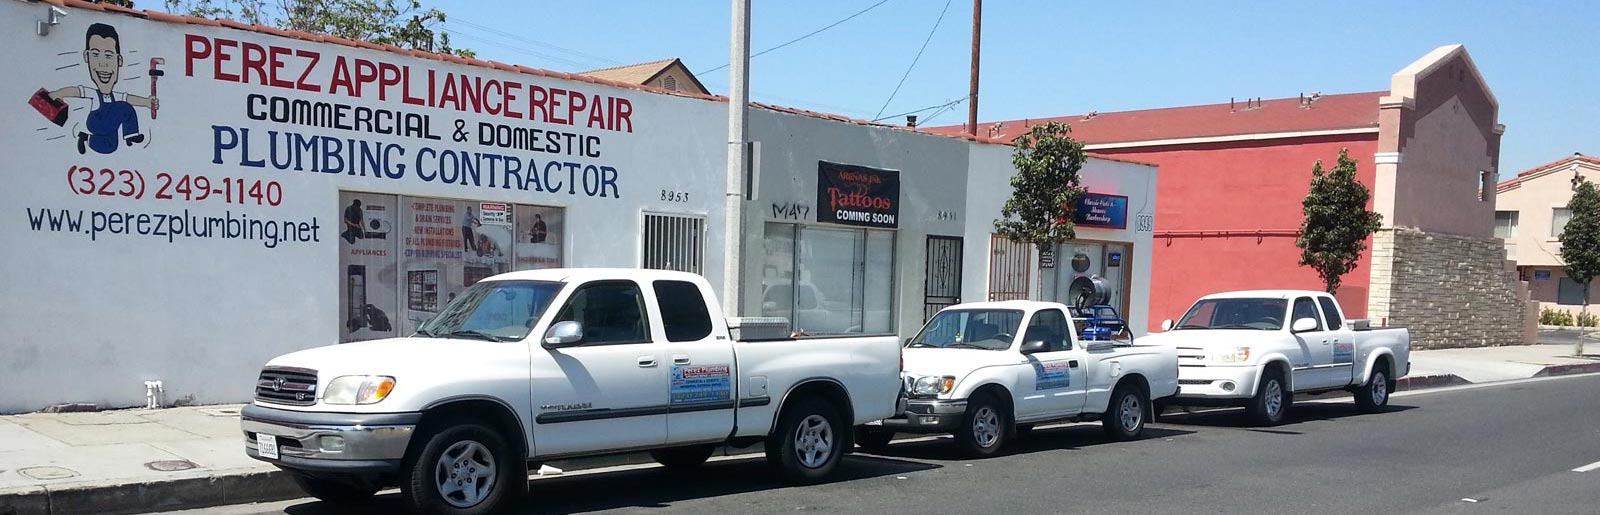 South Gate Plumbing Services